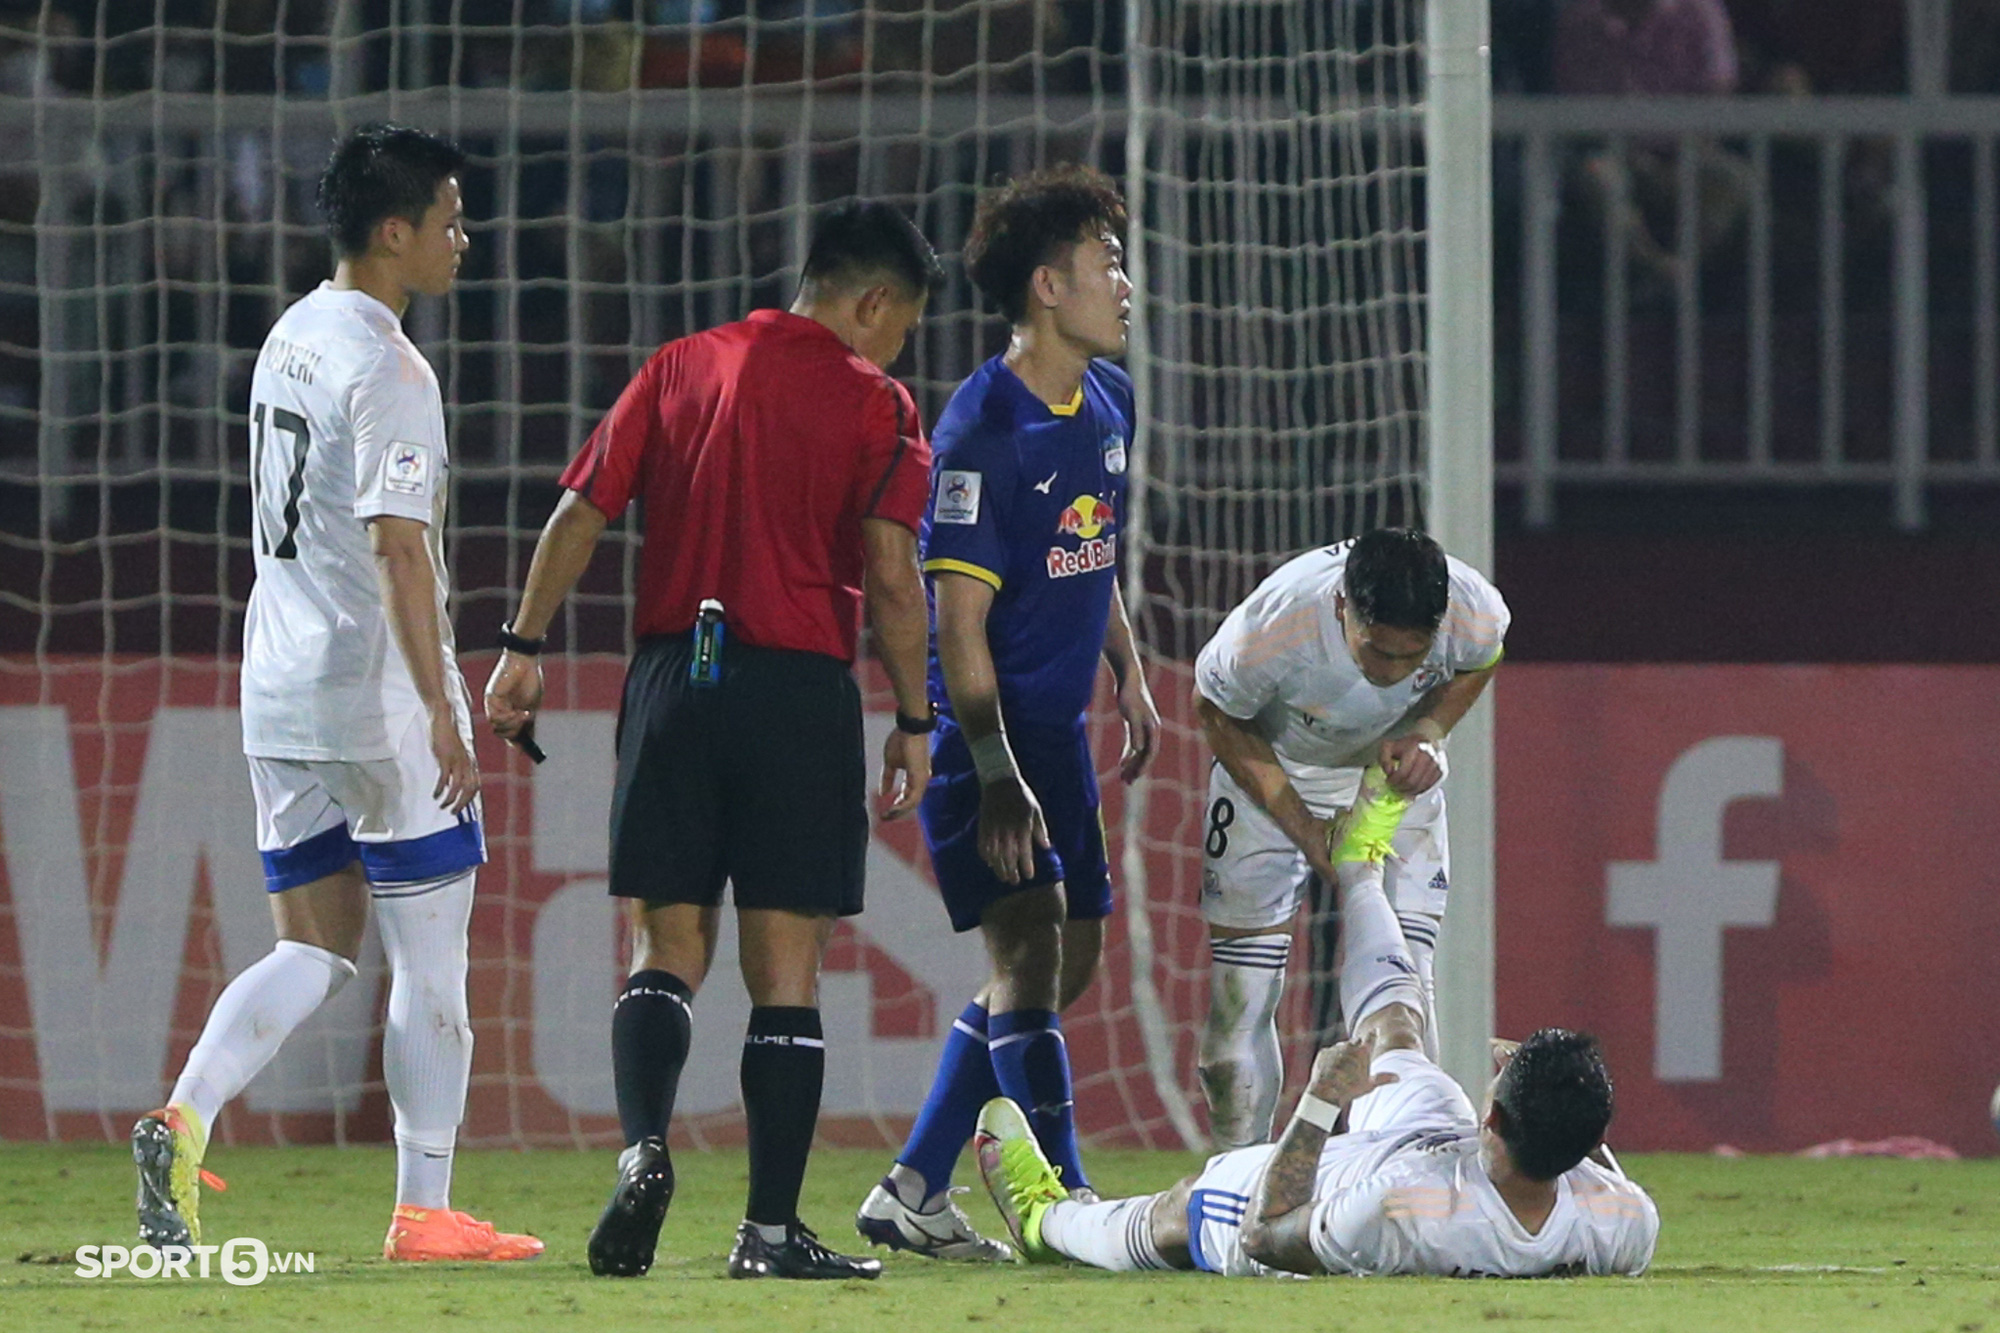 Xuan Truong played fair-play even though the home team was leading in the AFC Champions League - Photo 2.